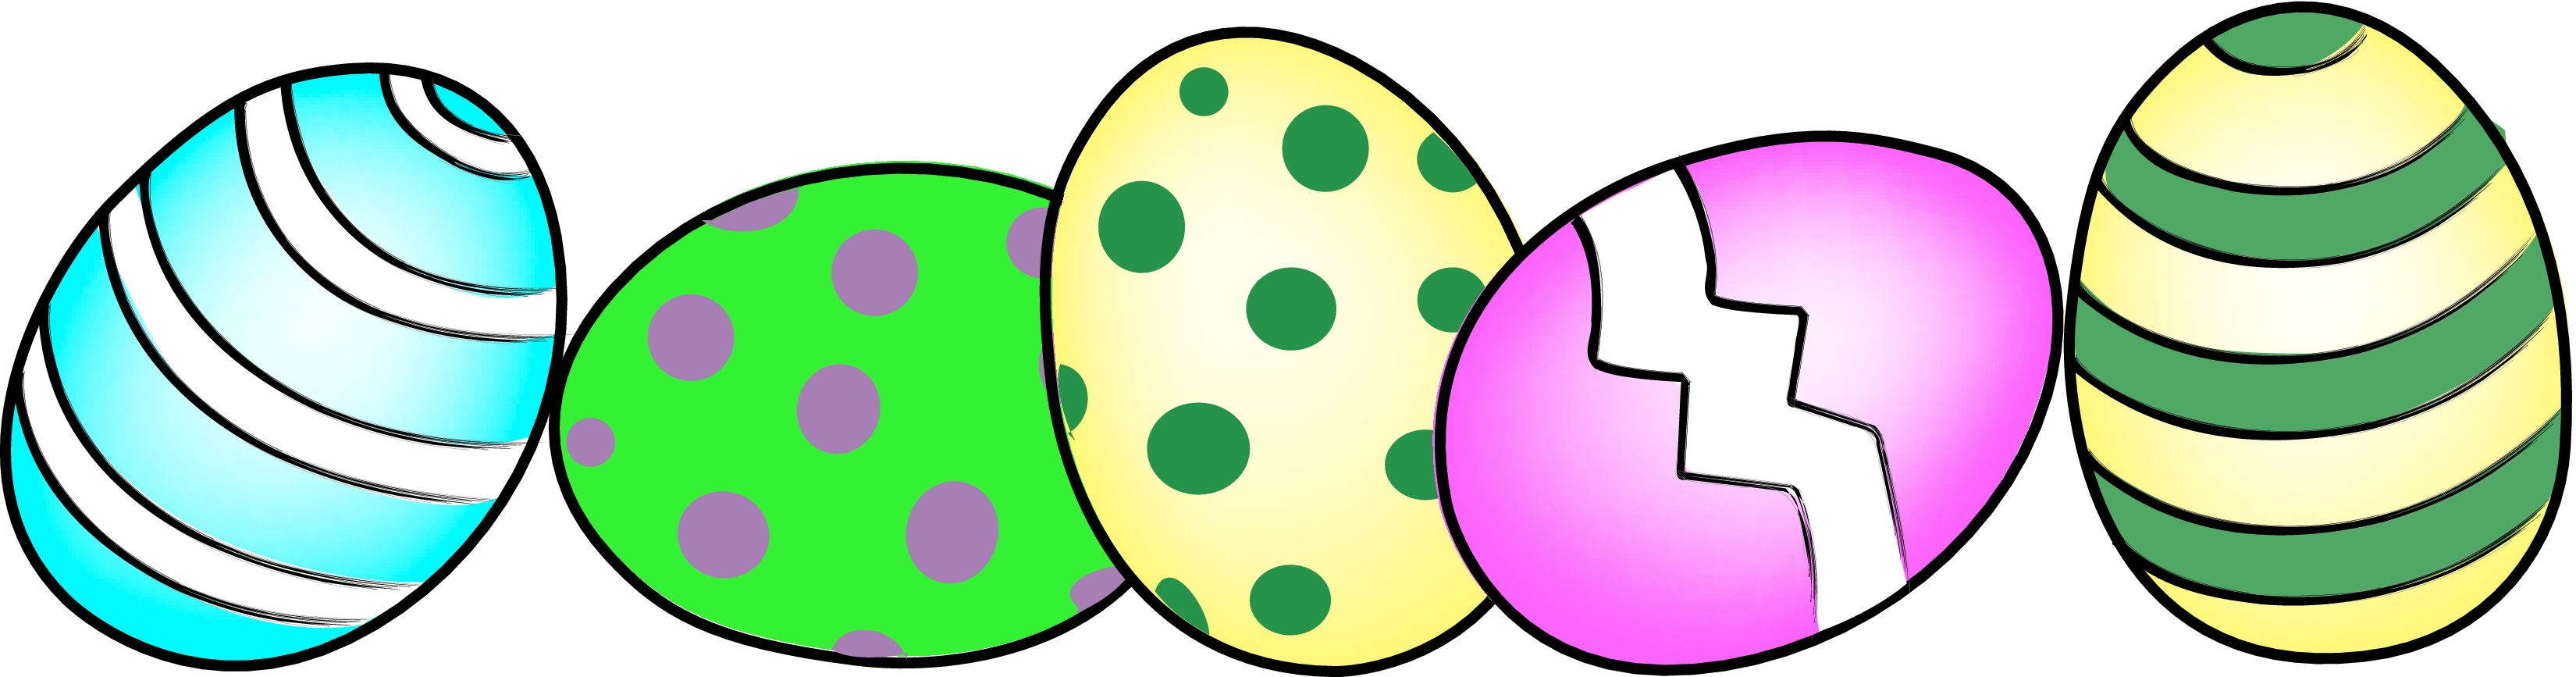 free easter clipart downloads - photo #35